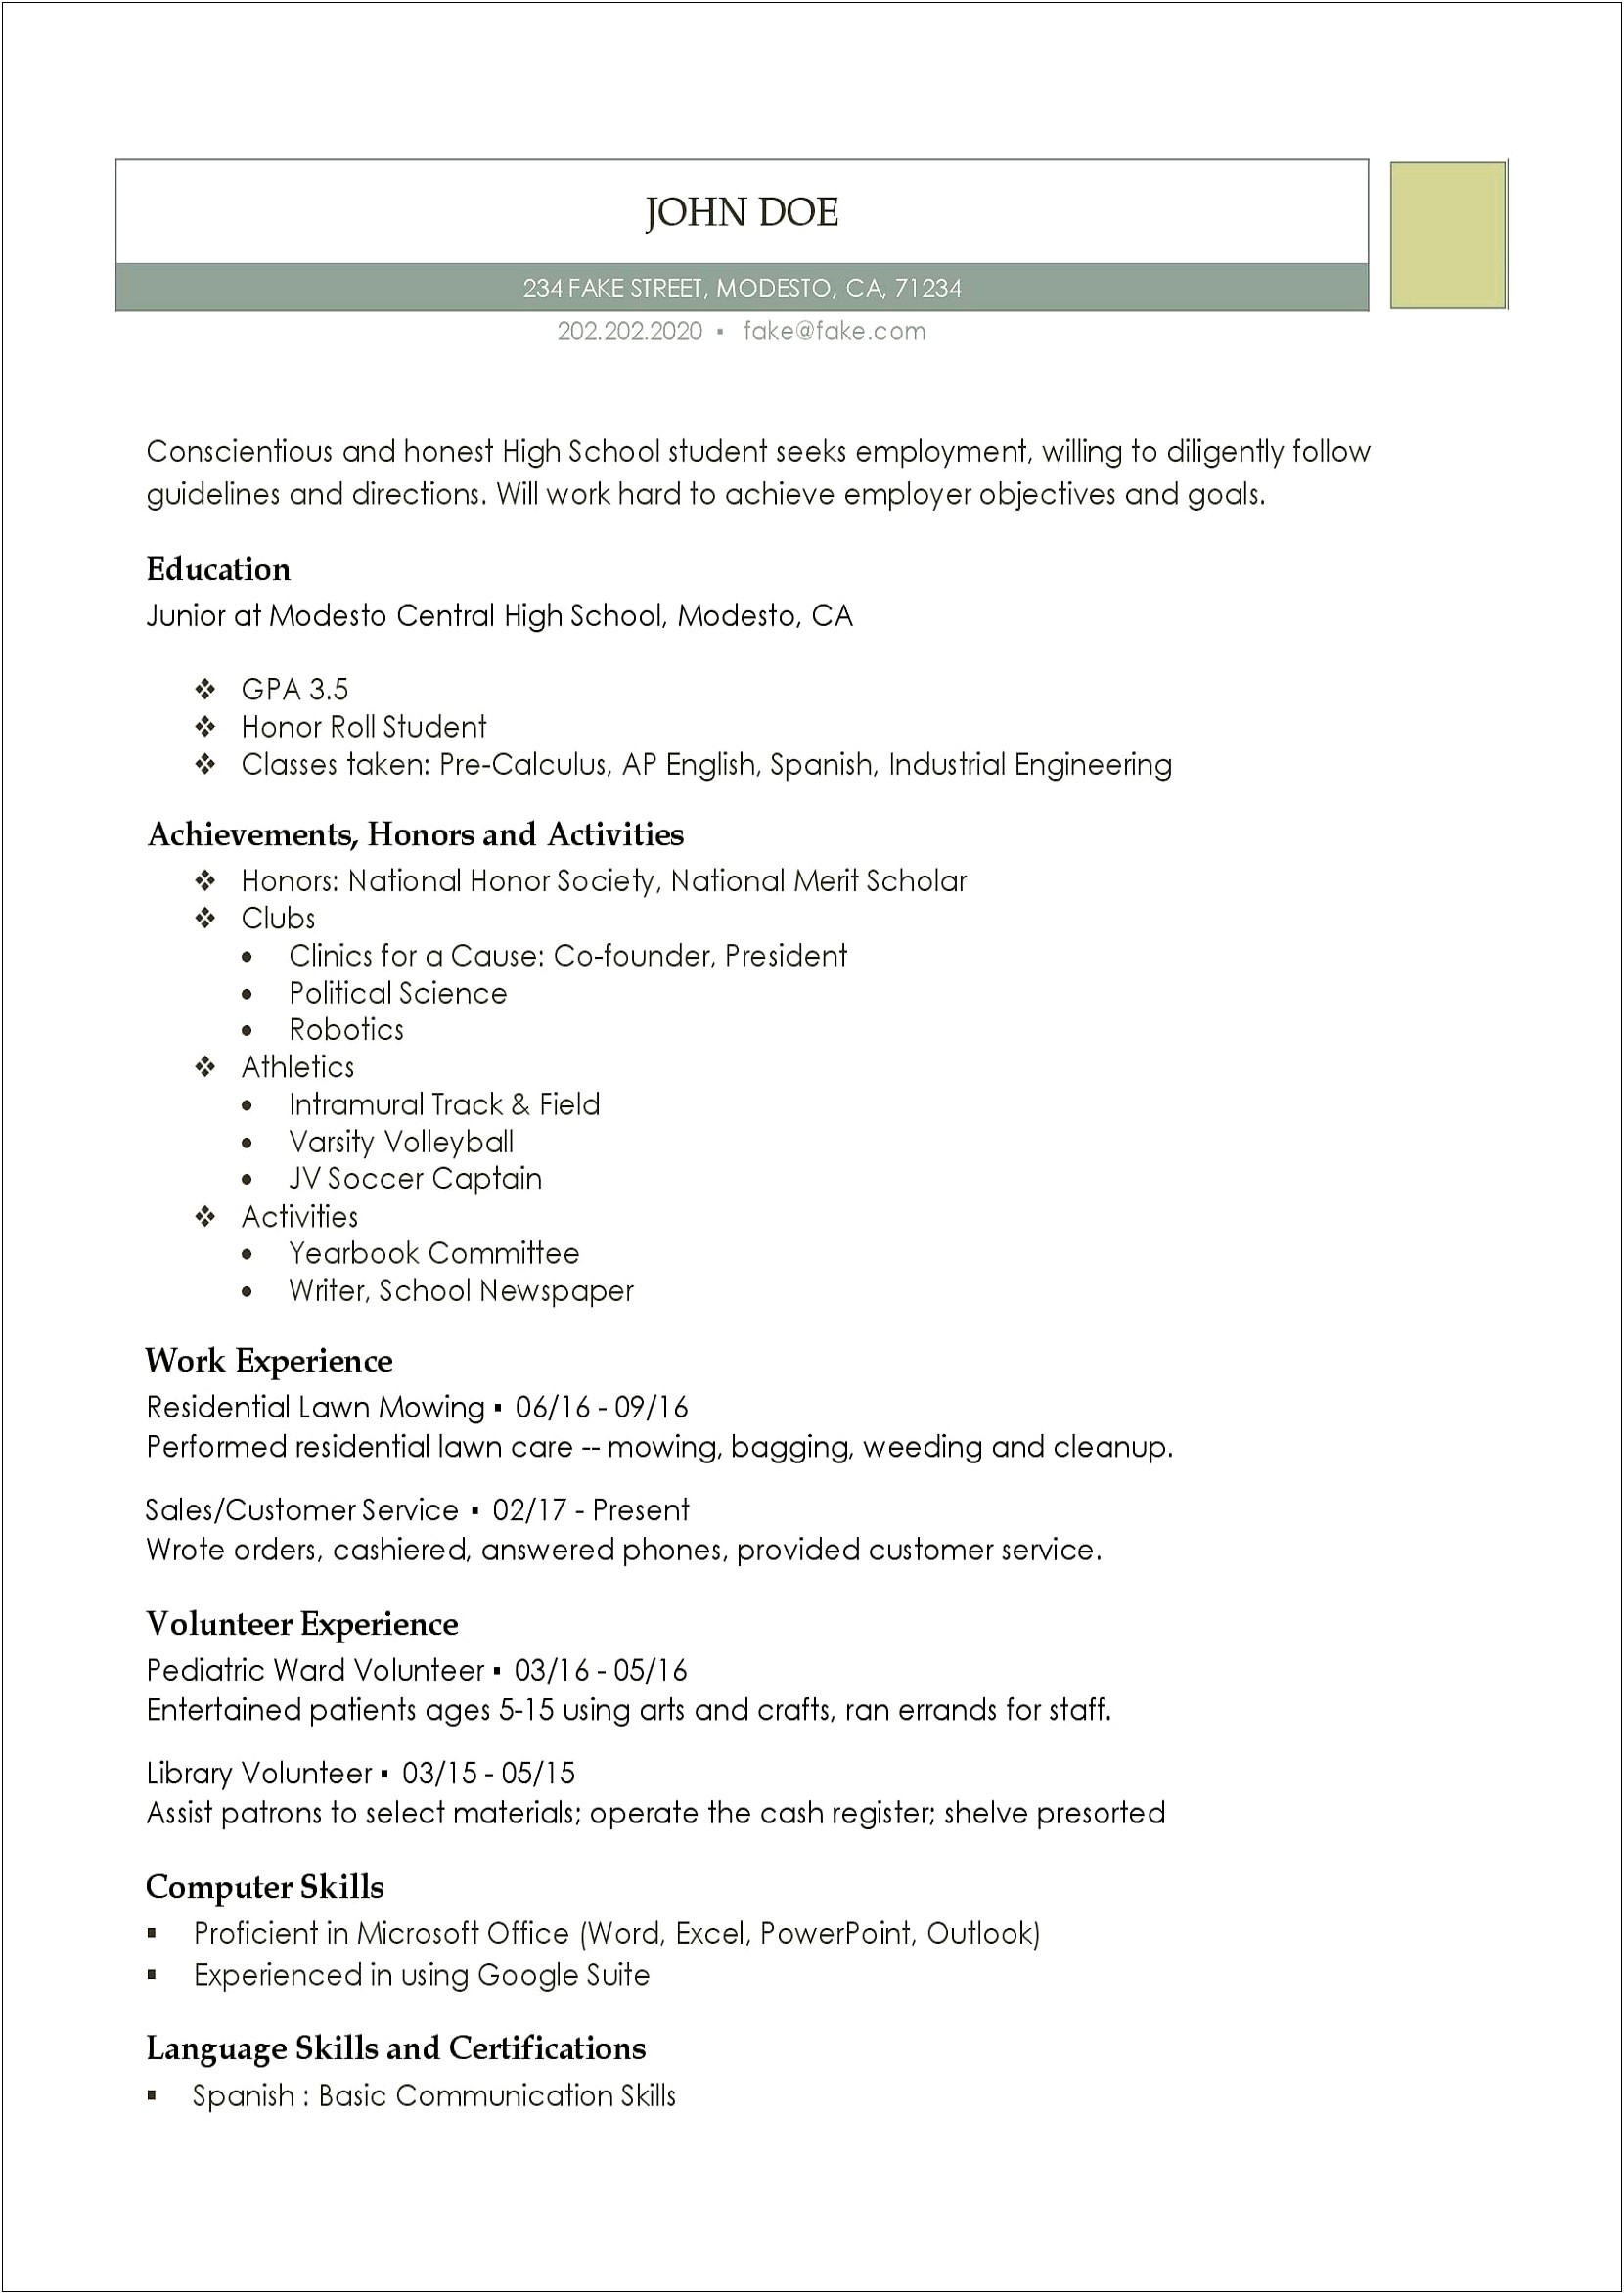 Resume For Applying To High School